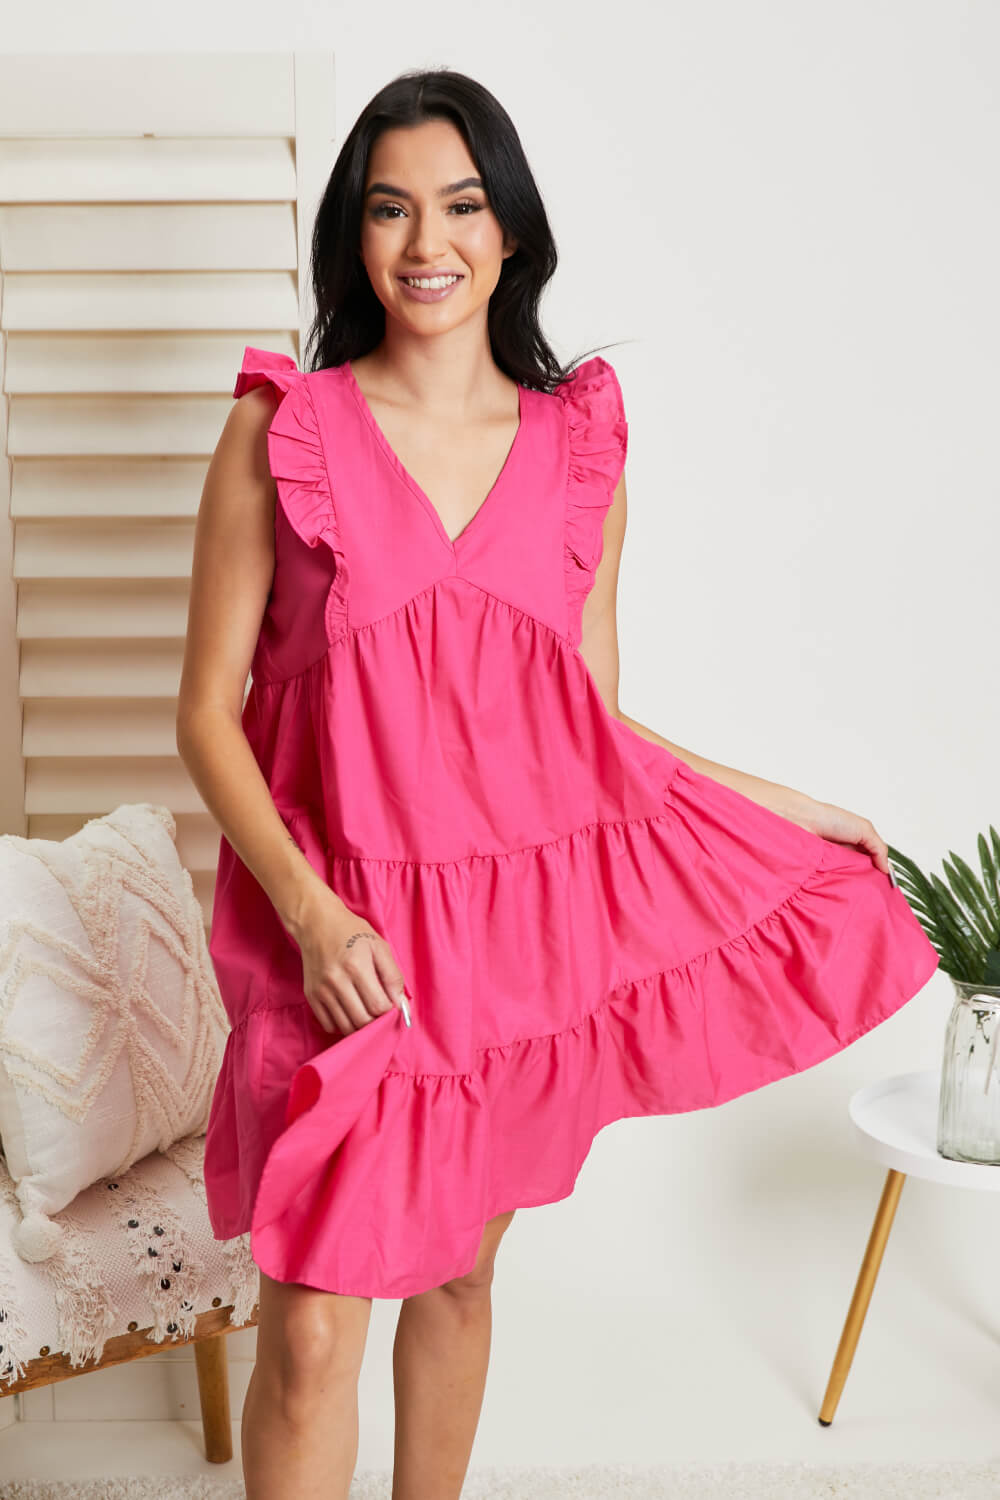 Hailey & Co Champs Elysees Tiered Dress in Fuchsia